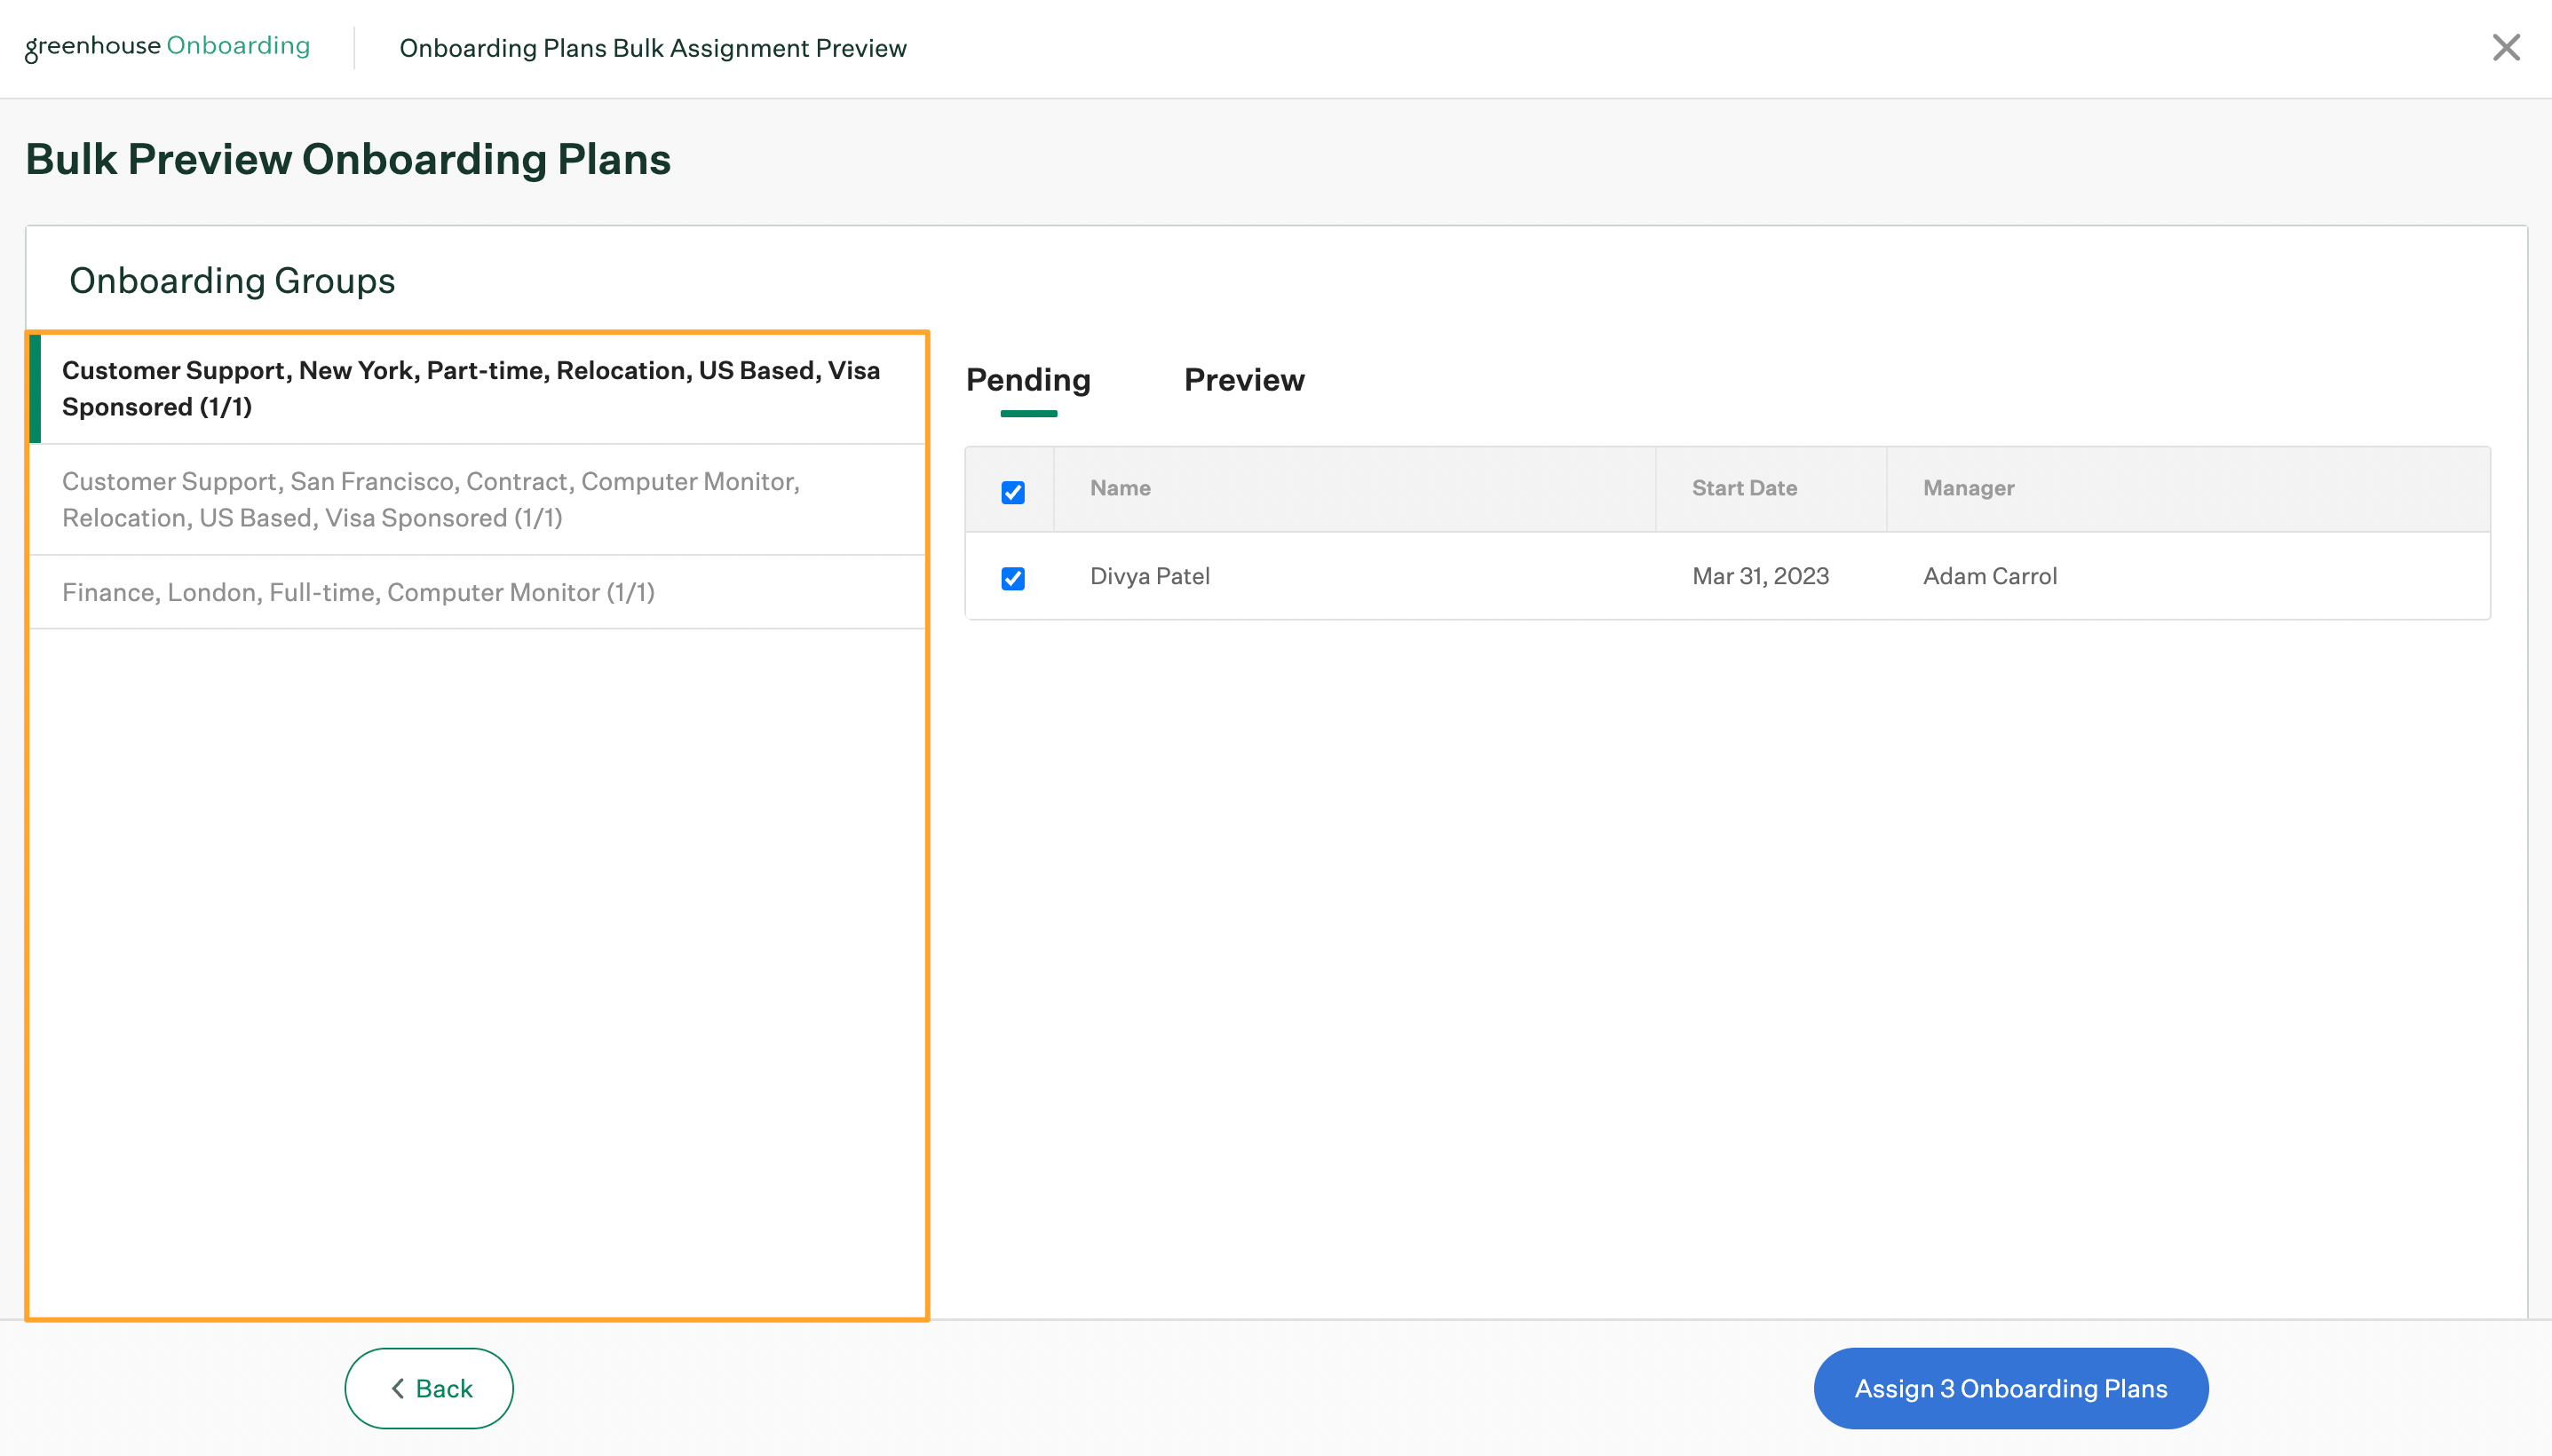 Bulk-preview-onboarding-plans-page-with-onboarding-groups-panel-highlighted.png